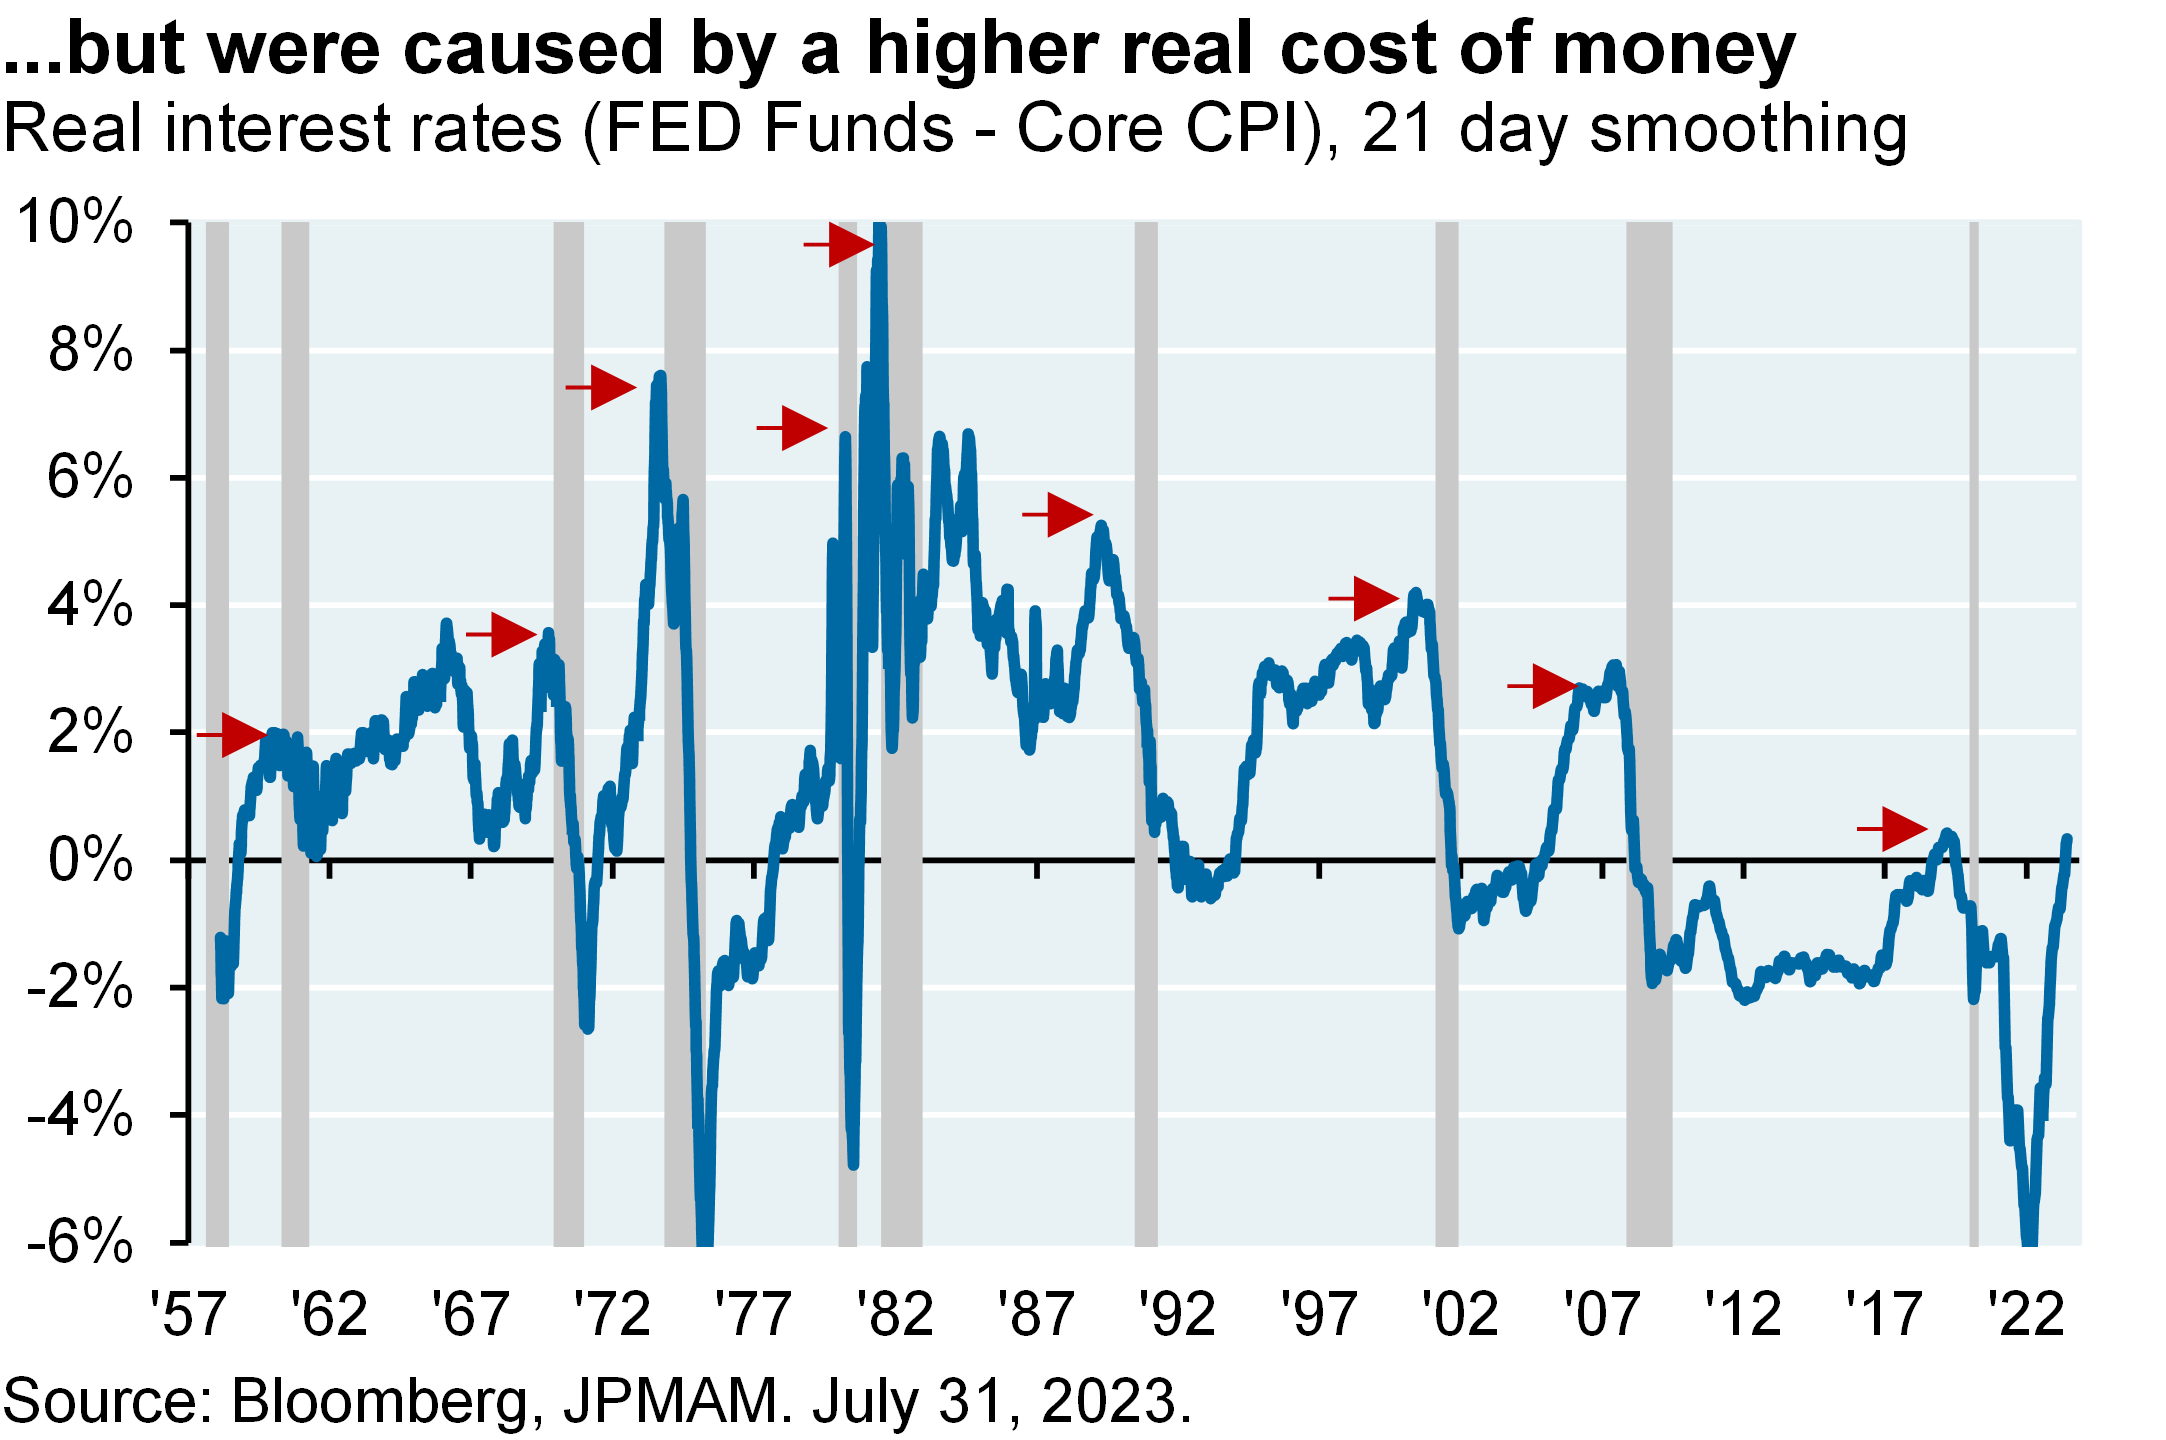 Line chart shows the difference between the Fed Funds rate and Core CPI since 1957. The line chart shows that the difference, or “real interest rates”, is around 0%. This means that policy rates are barely restrictive.